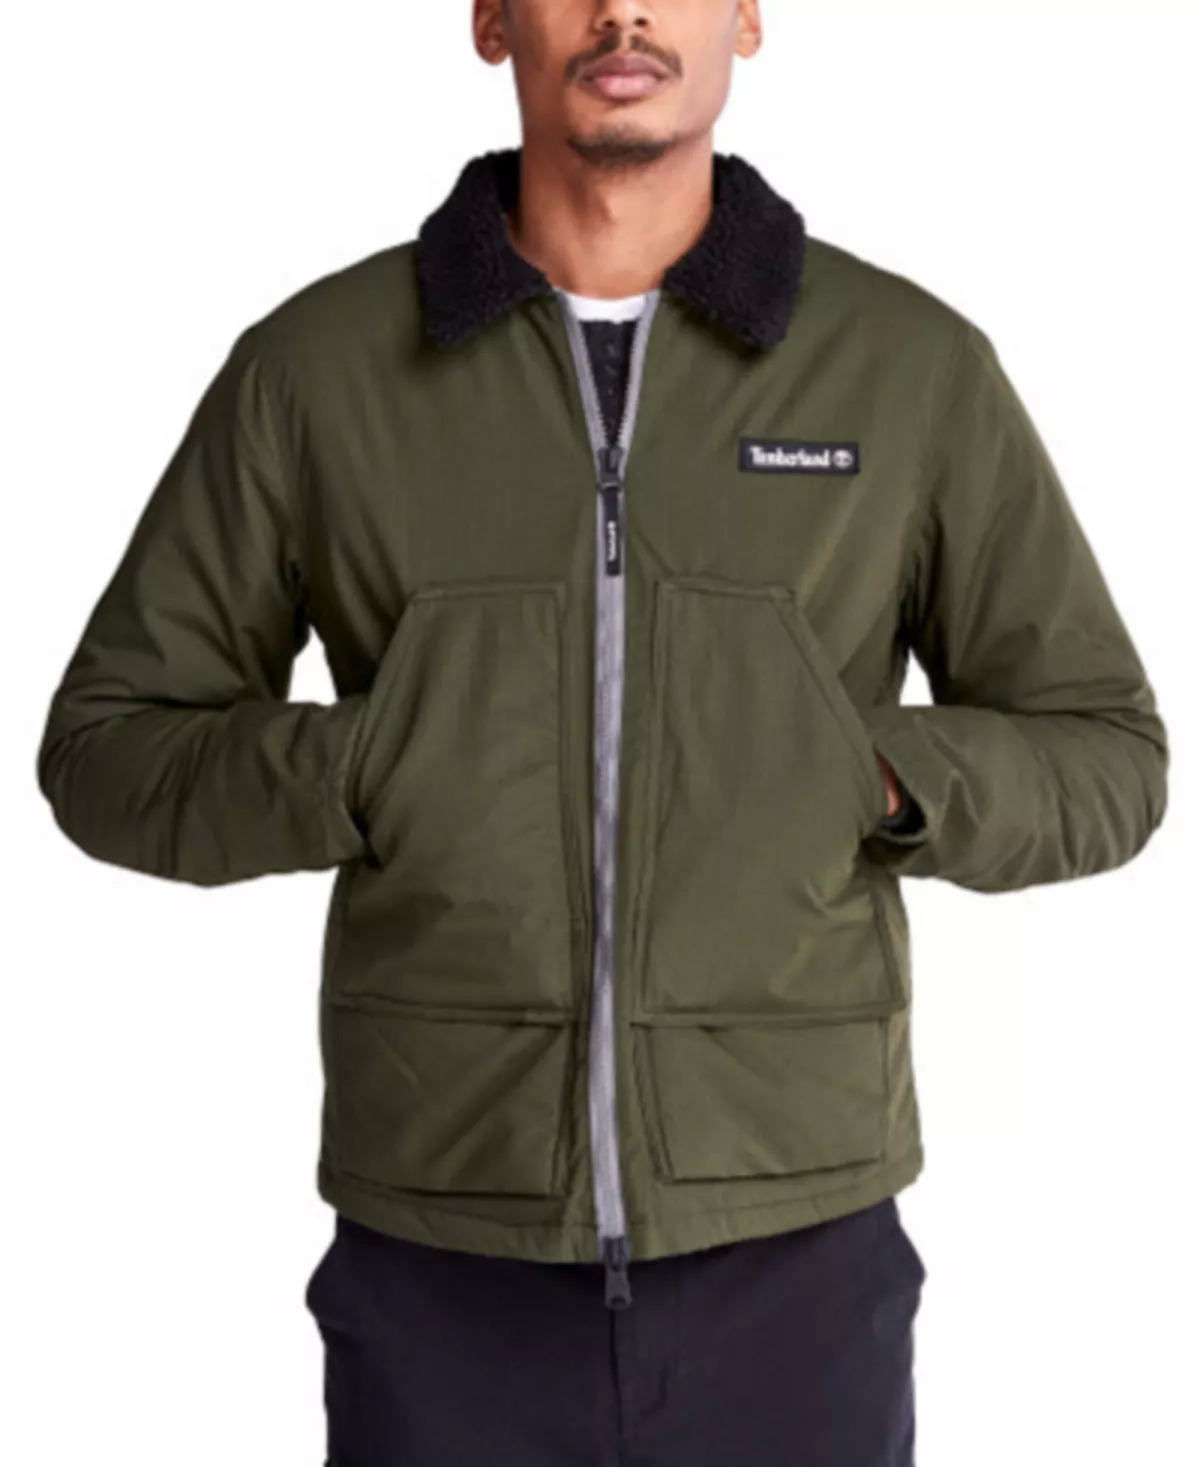 Timberland Men's Progressive Utility Water-Resistant Chore Jacket (2 Colors) $55.15 + Free Shipping